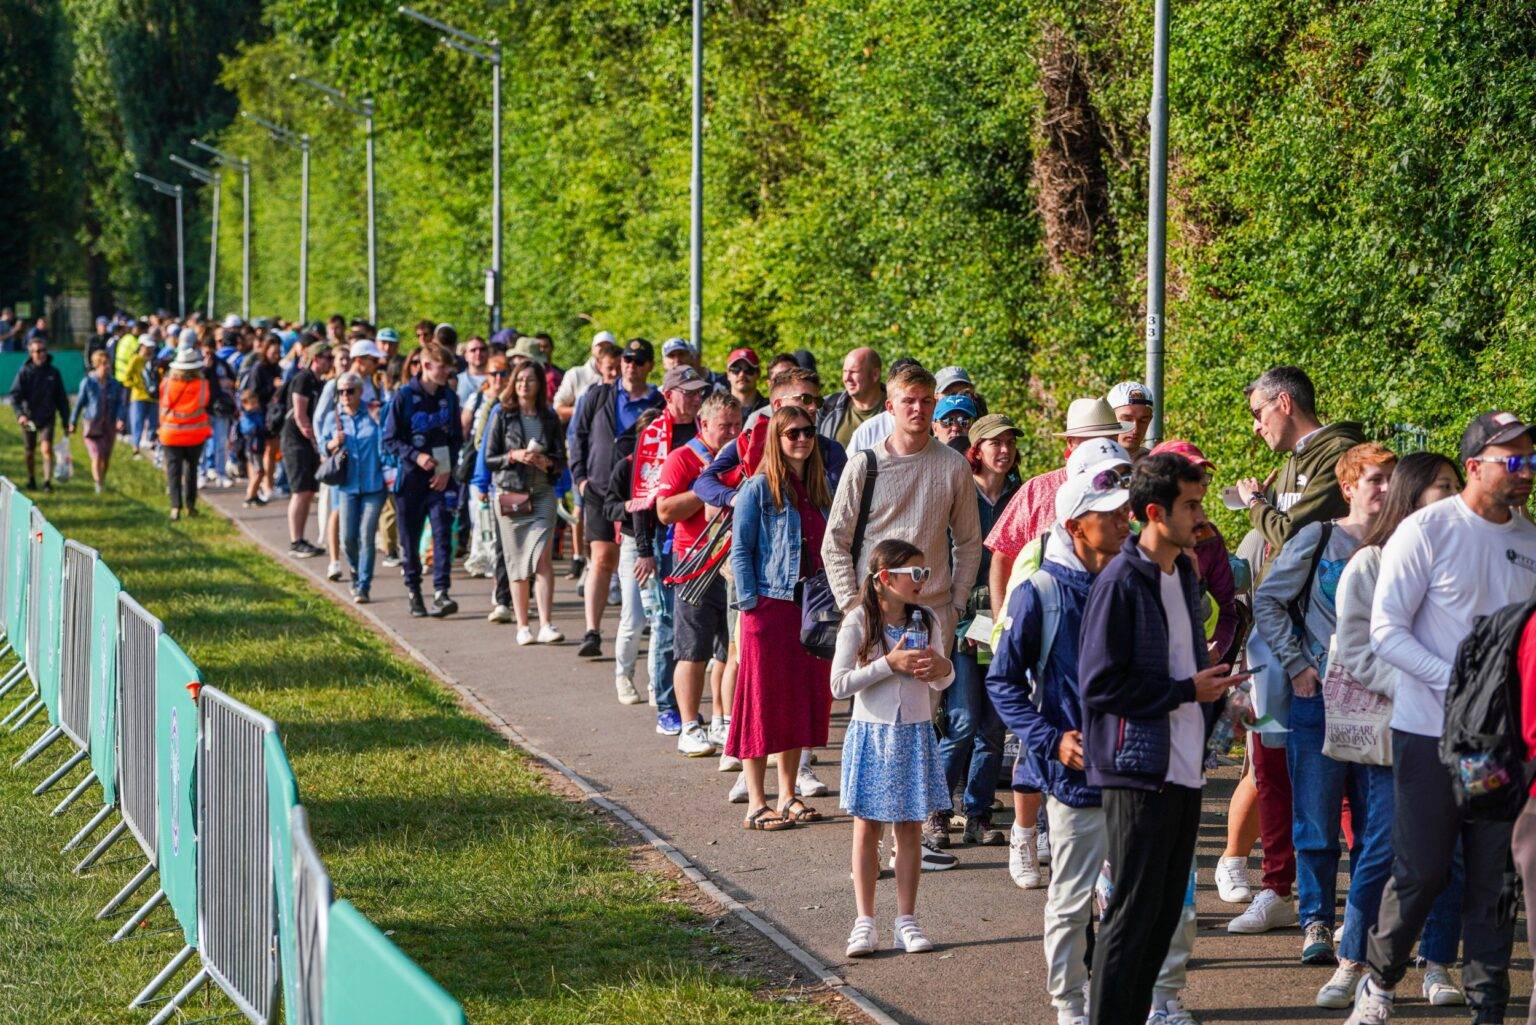 People stuck in ‘shambolic’ Wimbledon queue for hours after security beefed up